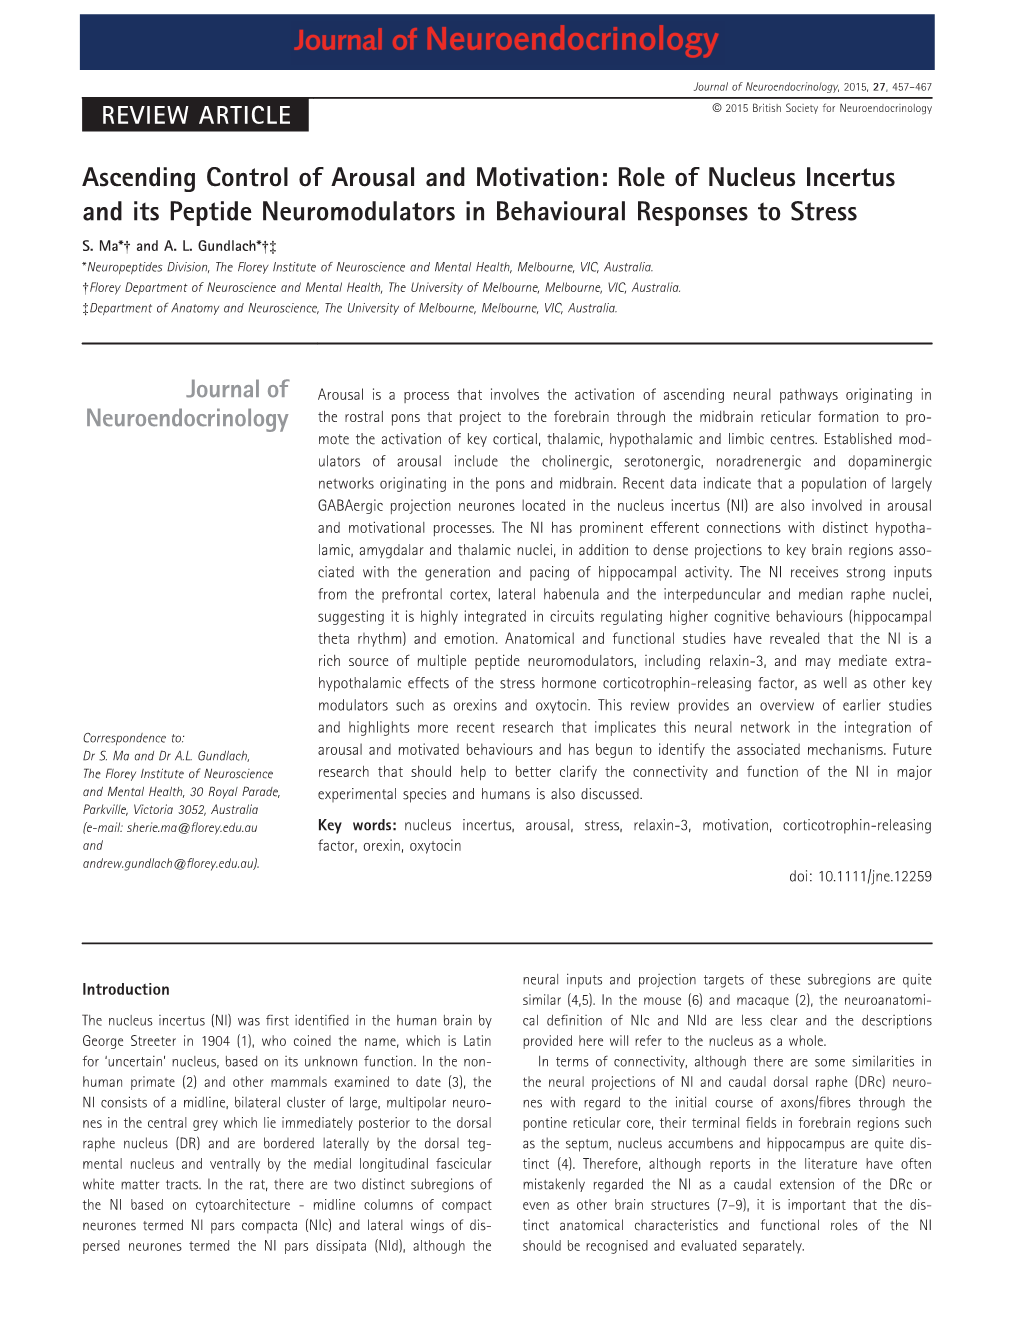 Ascending Control of Arousal and Motivation: Role of Nucleus Incertus and Its Peptide Neuromodulators in Behavioural Responses to Stress S